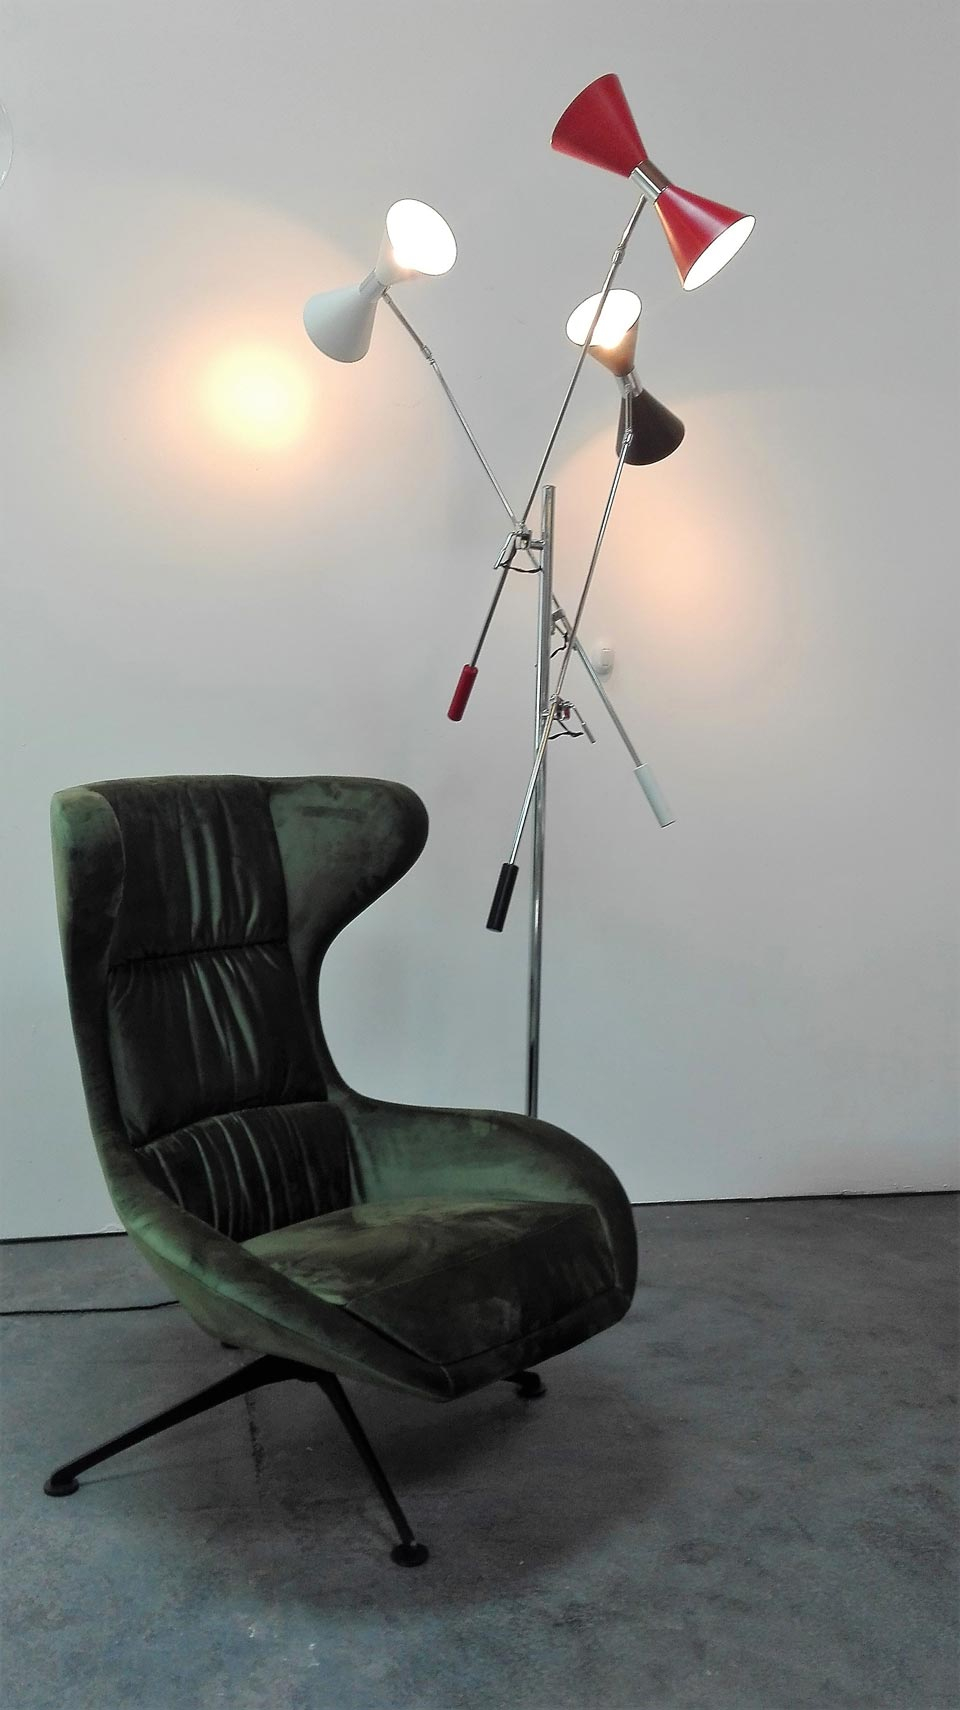 50s Style Floor Lamp Chrome Articulated Arms Three Lacquered Aluminum Lampshades with regard to size 960 X 1710